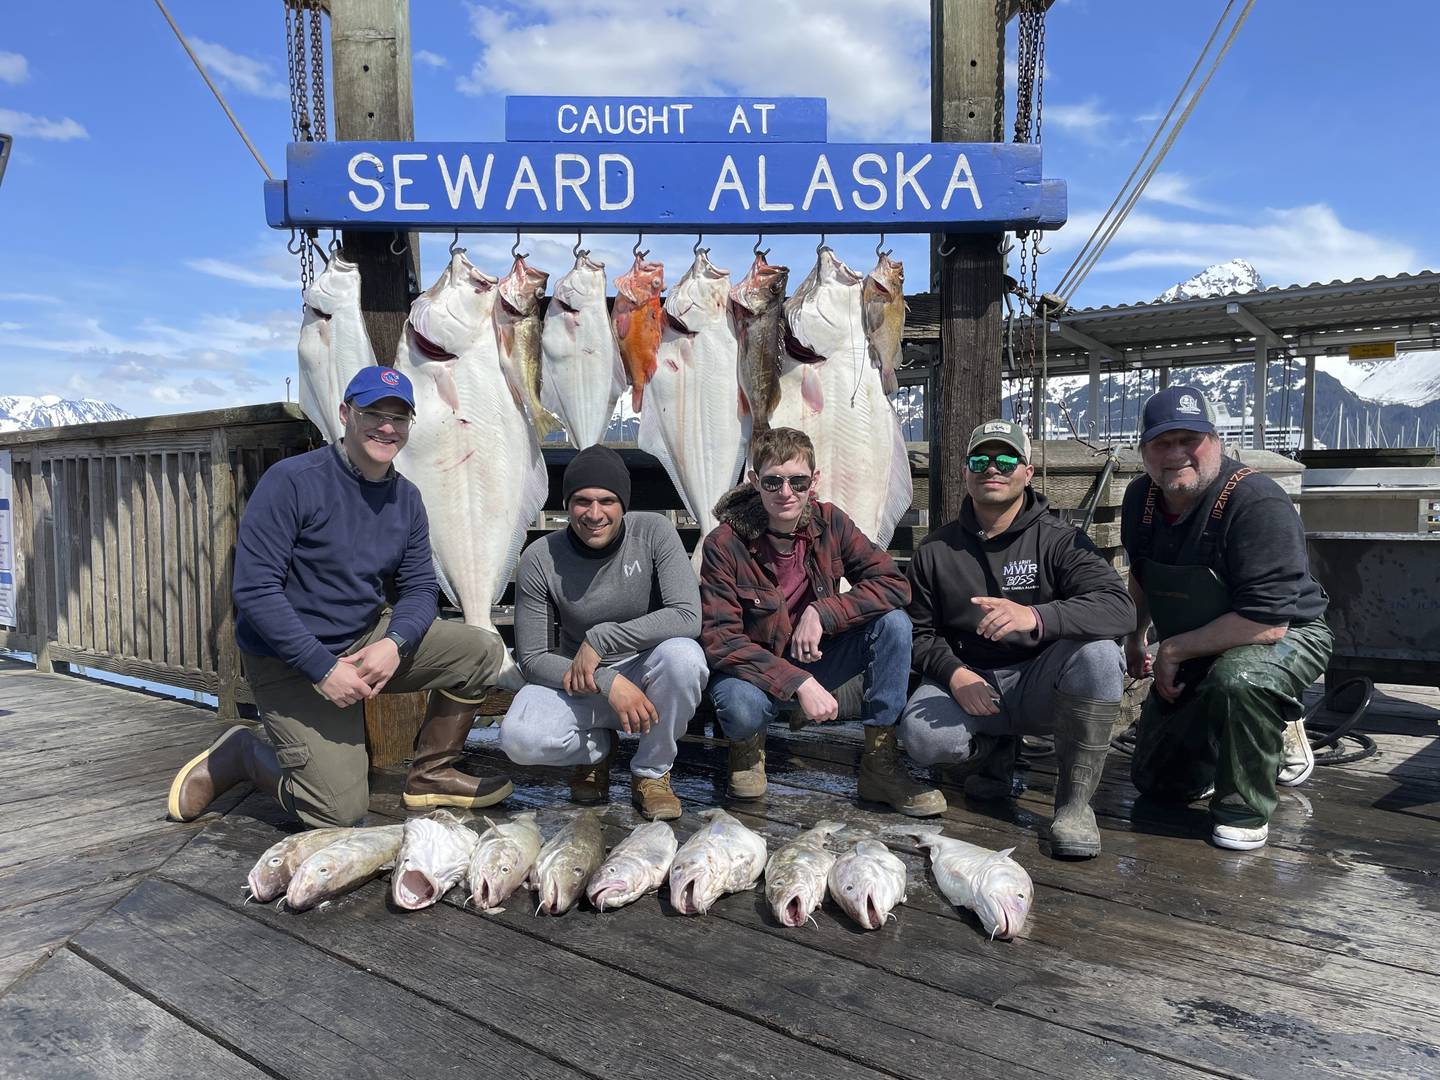 Captain John Moline, right, poses for a photo with others during the annual ASYMCA Alaska Combat Fishing Tournament on May 25, 2022, in Seward, Alaska.